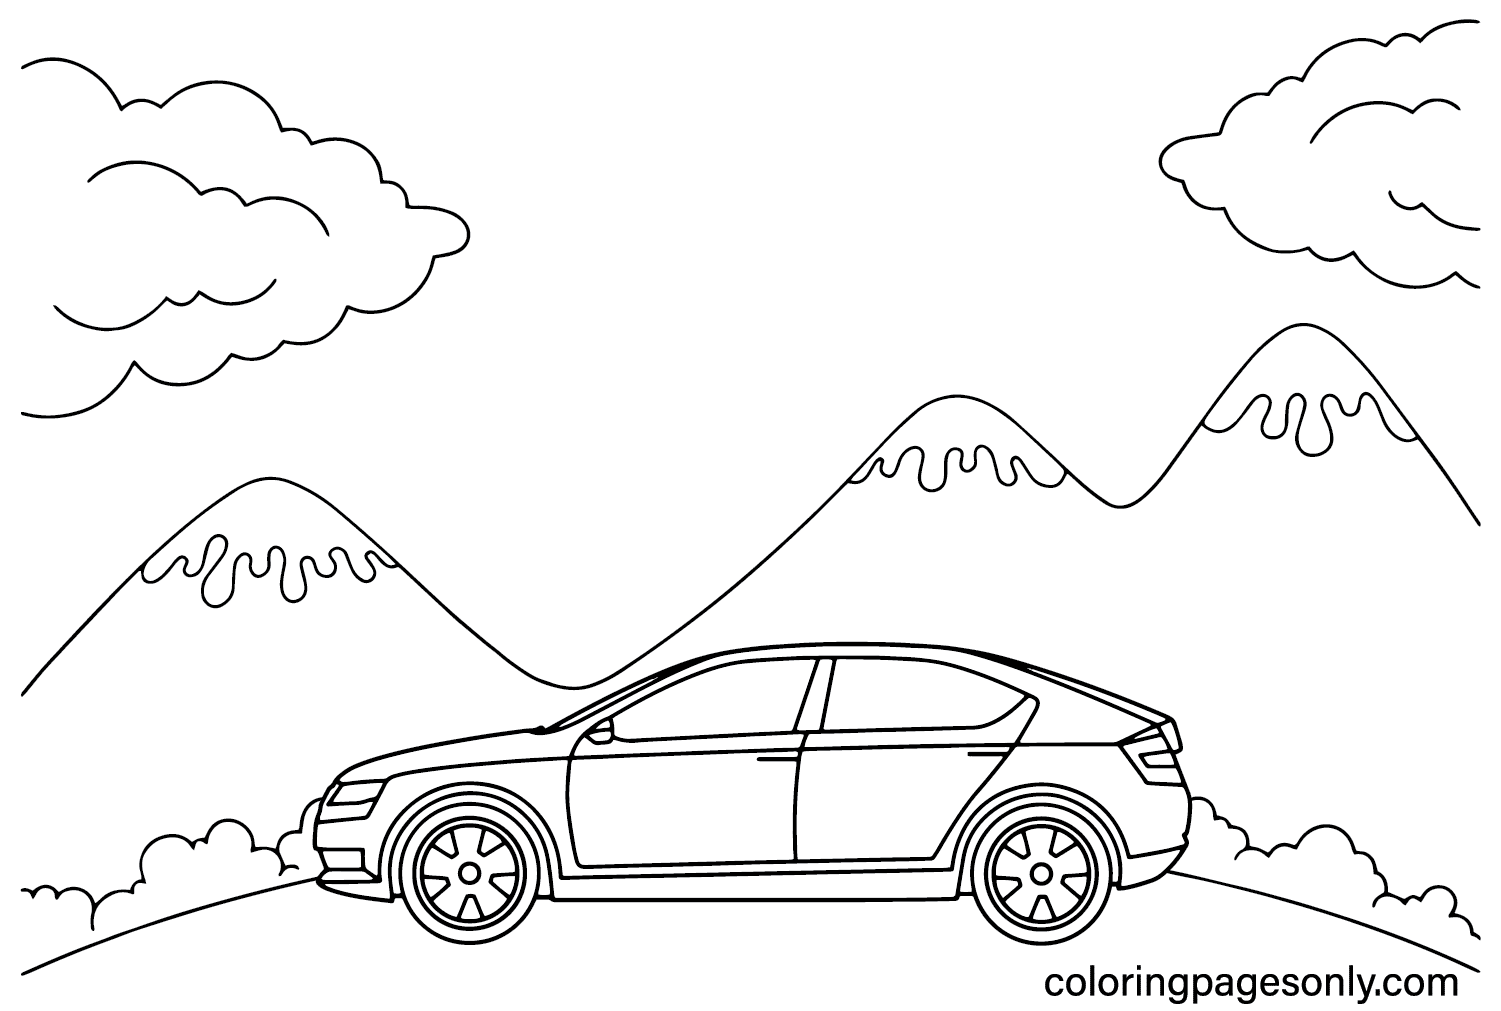 Skoda Vision D Coloring Page from Skoda